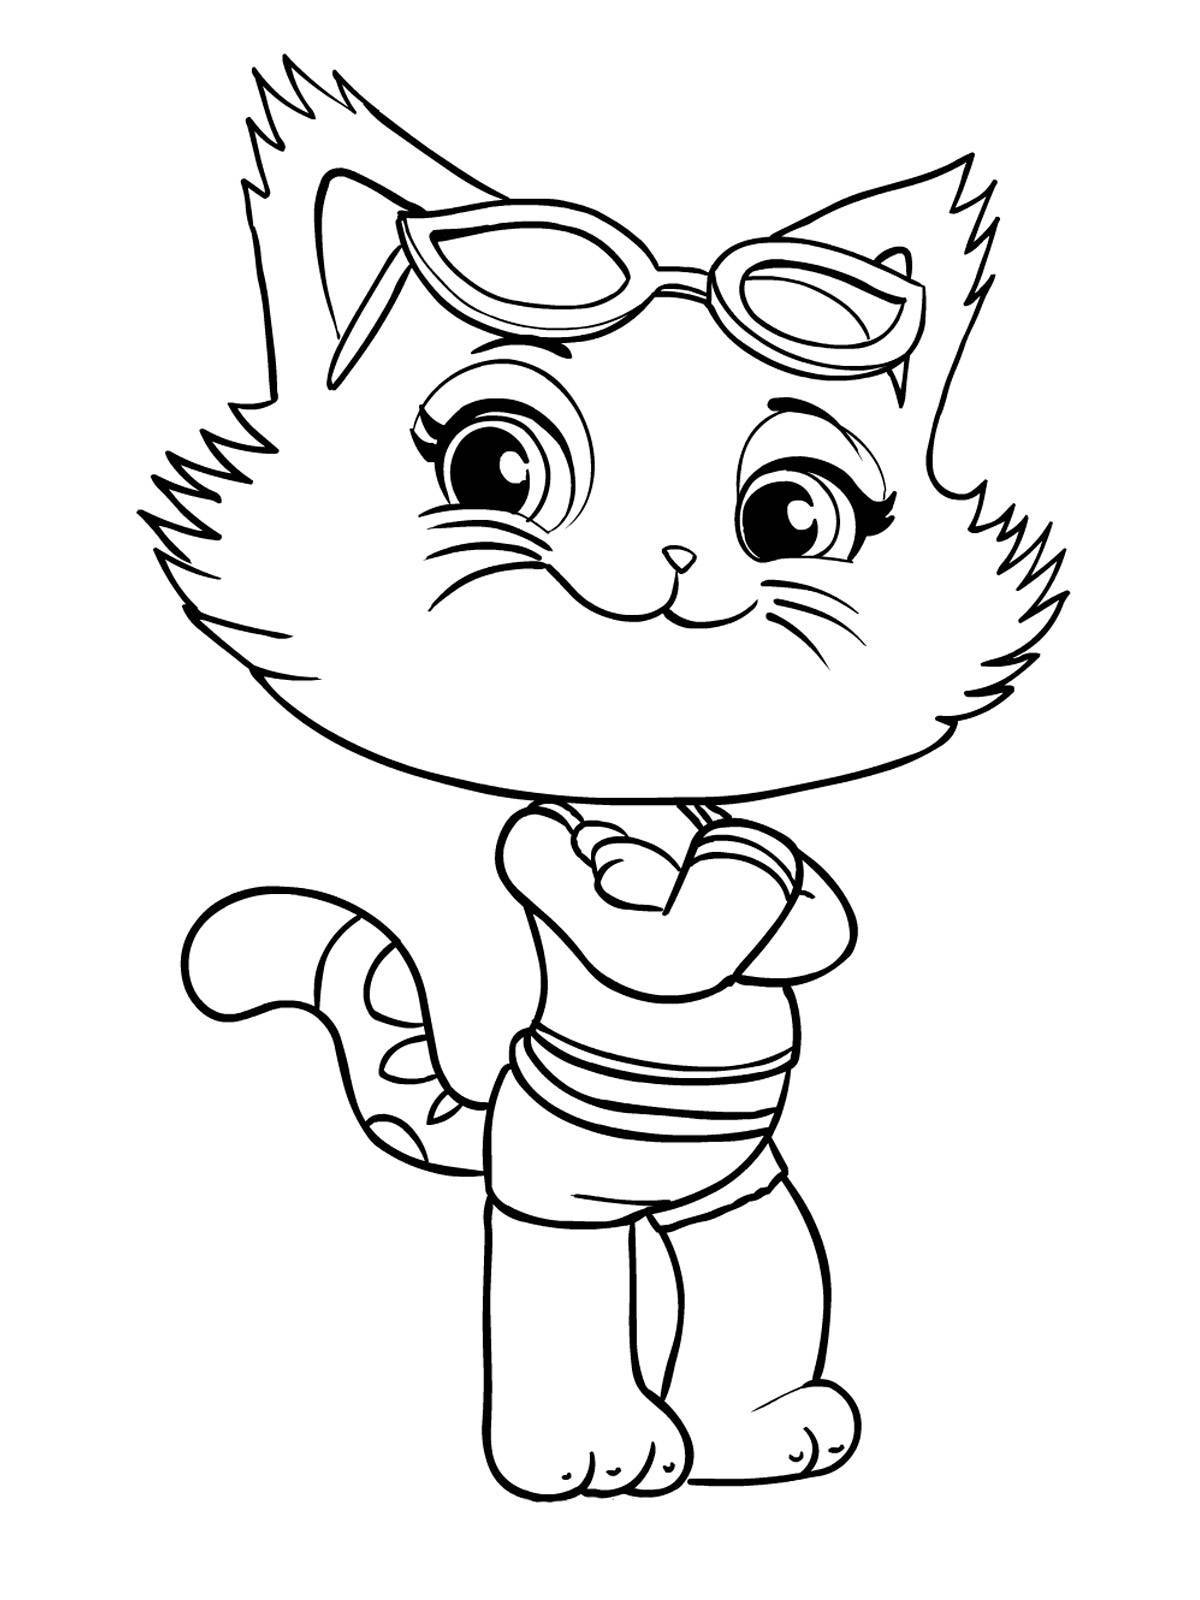 Coloring page affectionate kittens